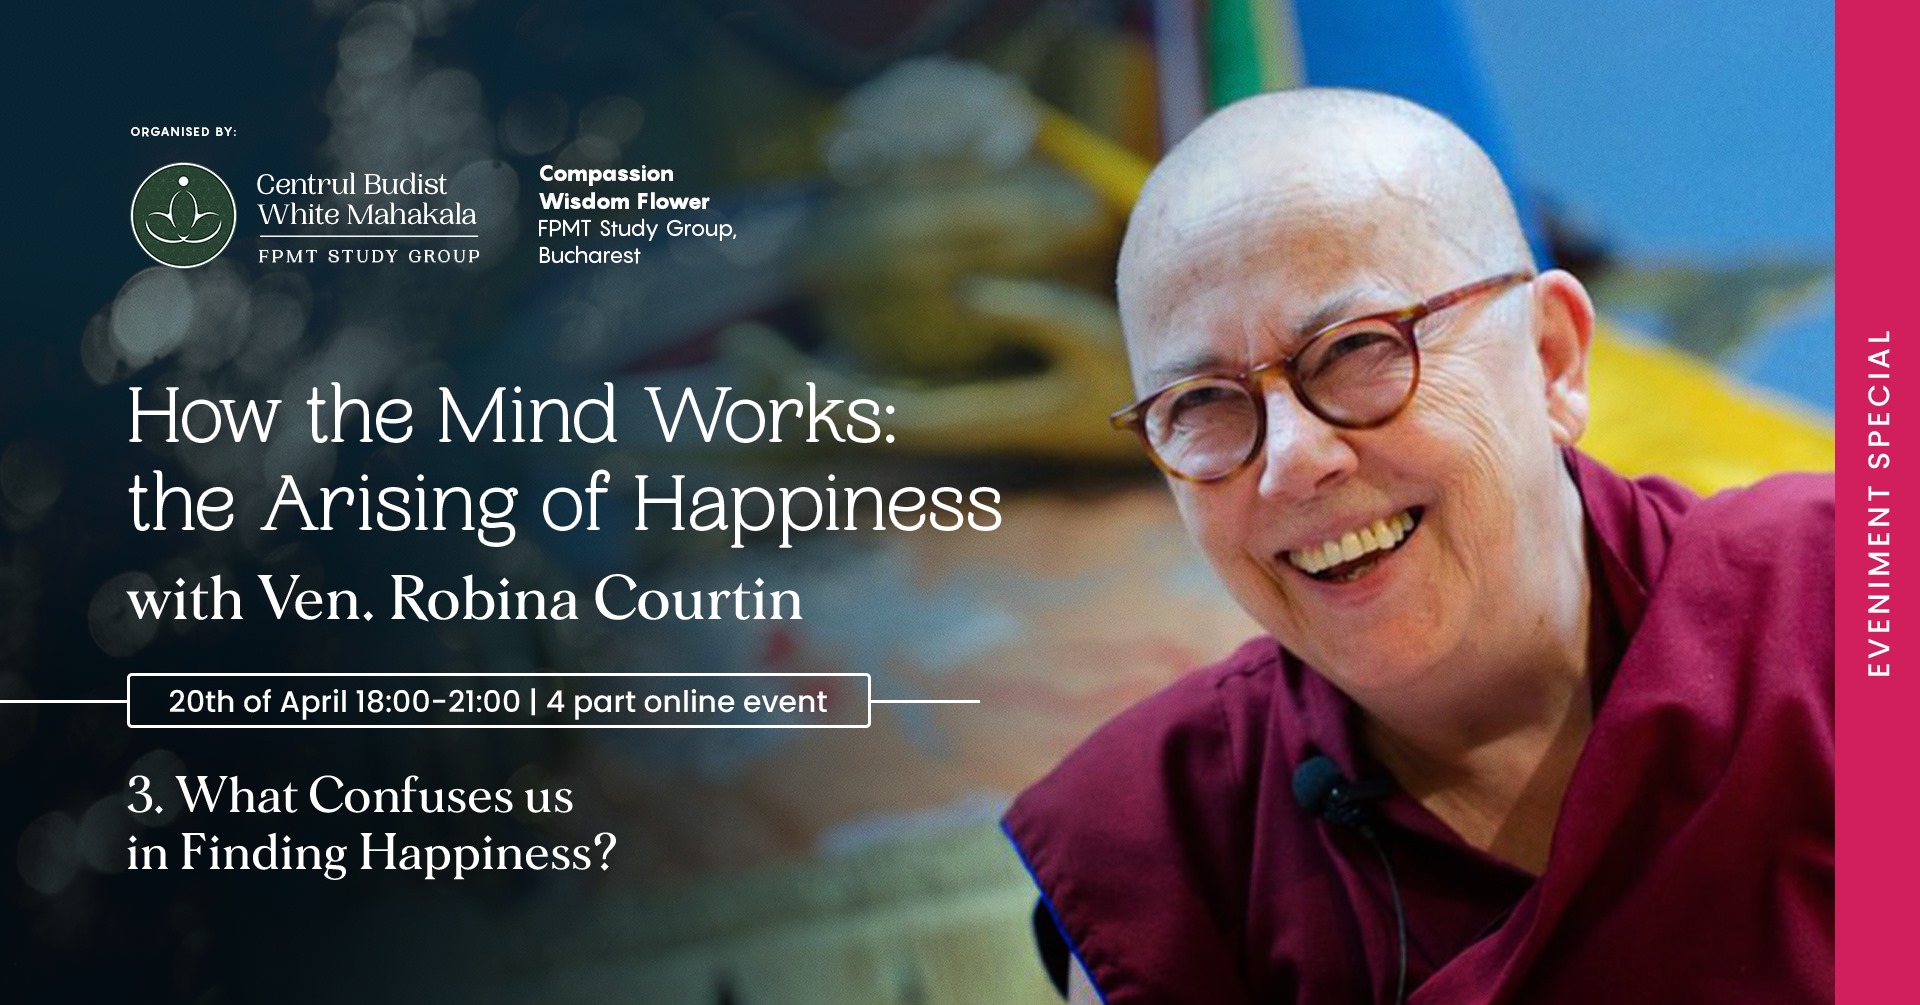 WHAT CONFUSES US IN FINDING HAPPINESS?  with Venerable Robina Courtin